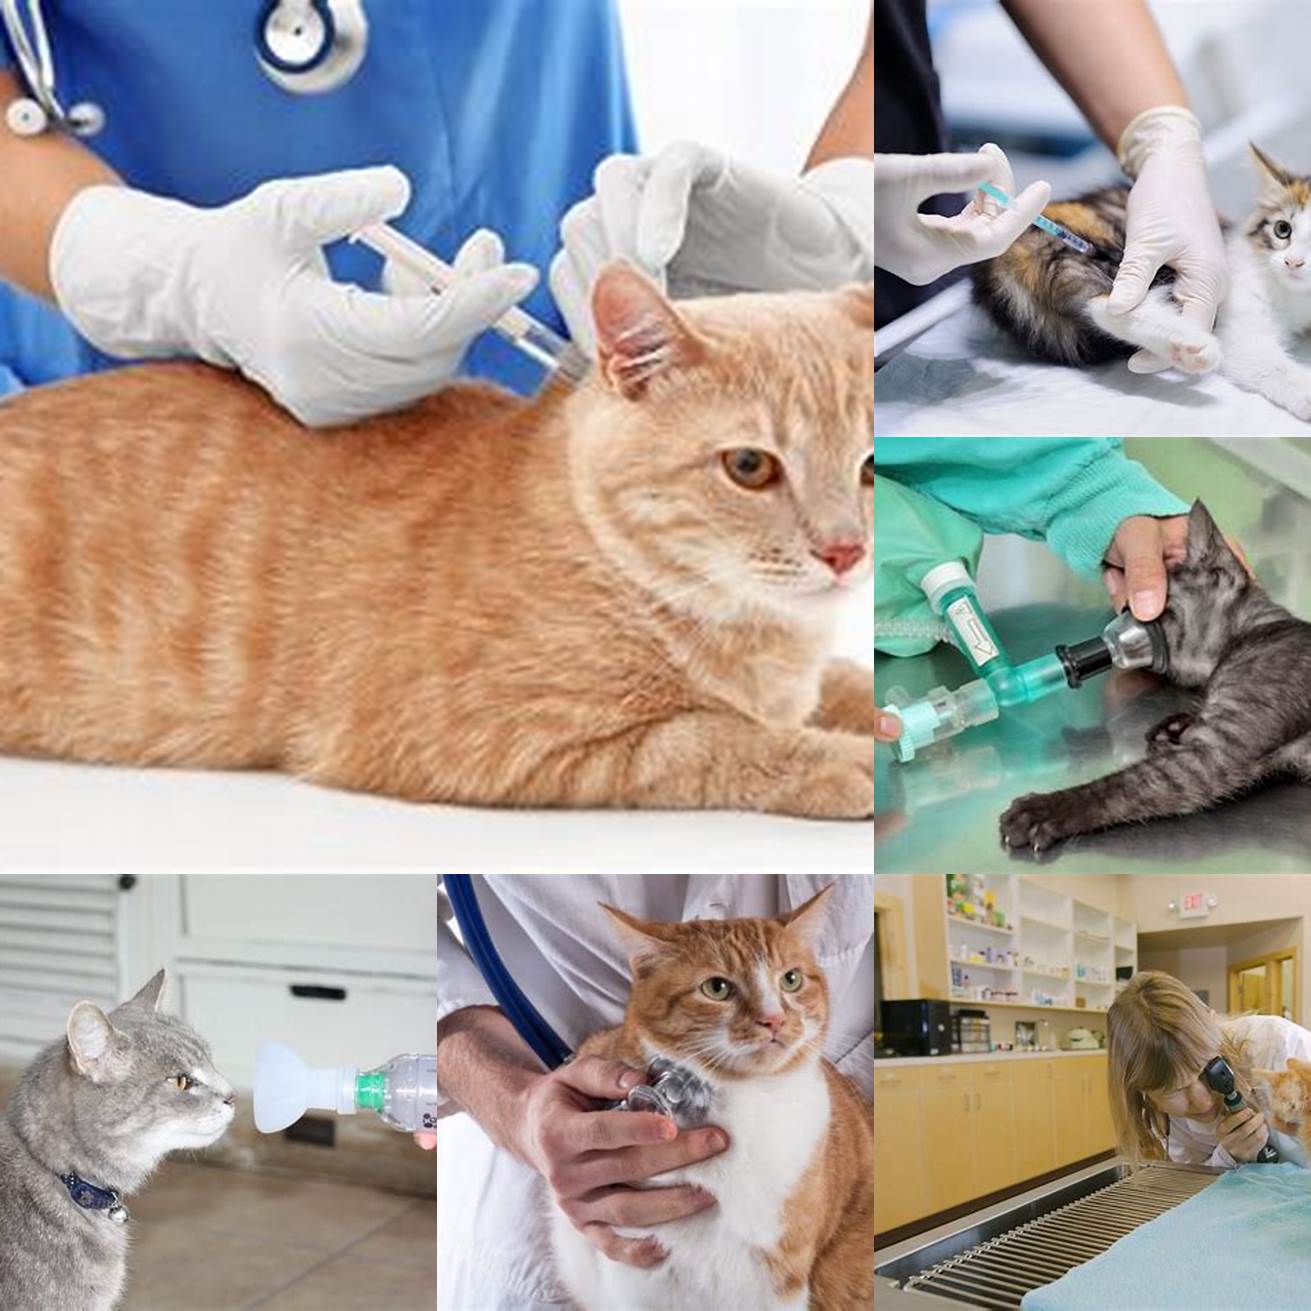 Cat Receiving MedicationBuprenorphine can be administered orally or injected by your veterinarian It is important to follow the instructions provided by your veterinarian carefully